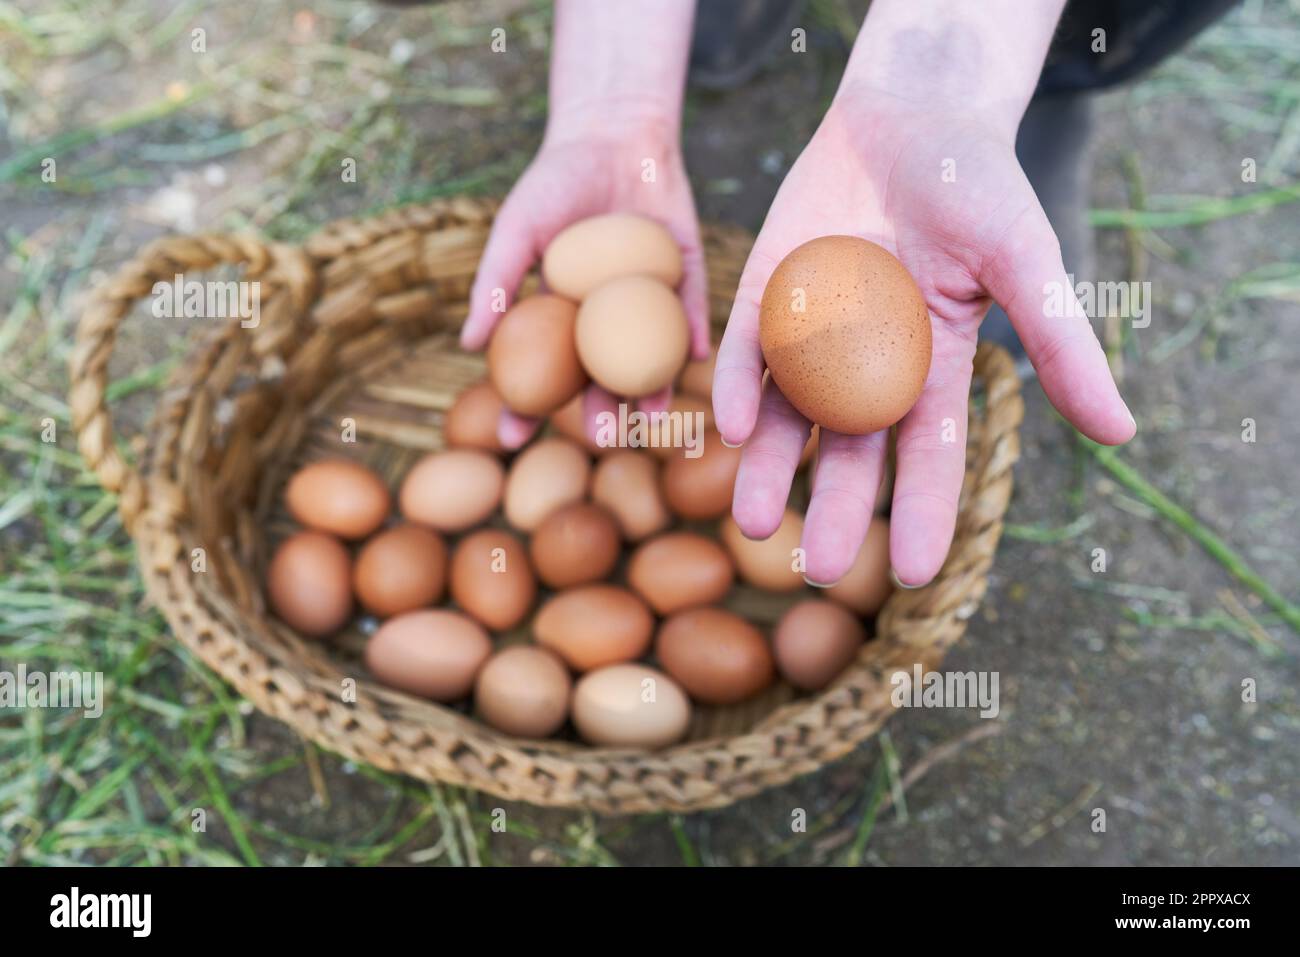 Female farmer holding brown eggs over wicker basket at poultry farm Stock Photo